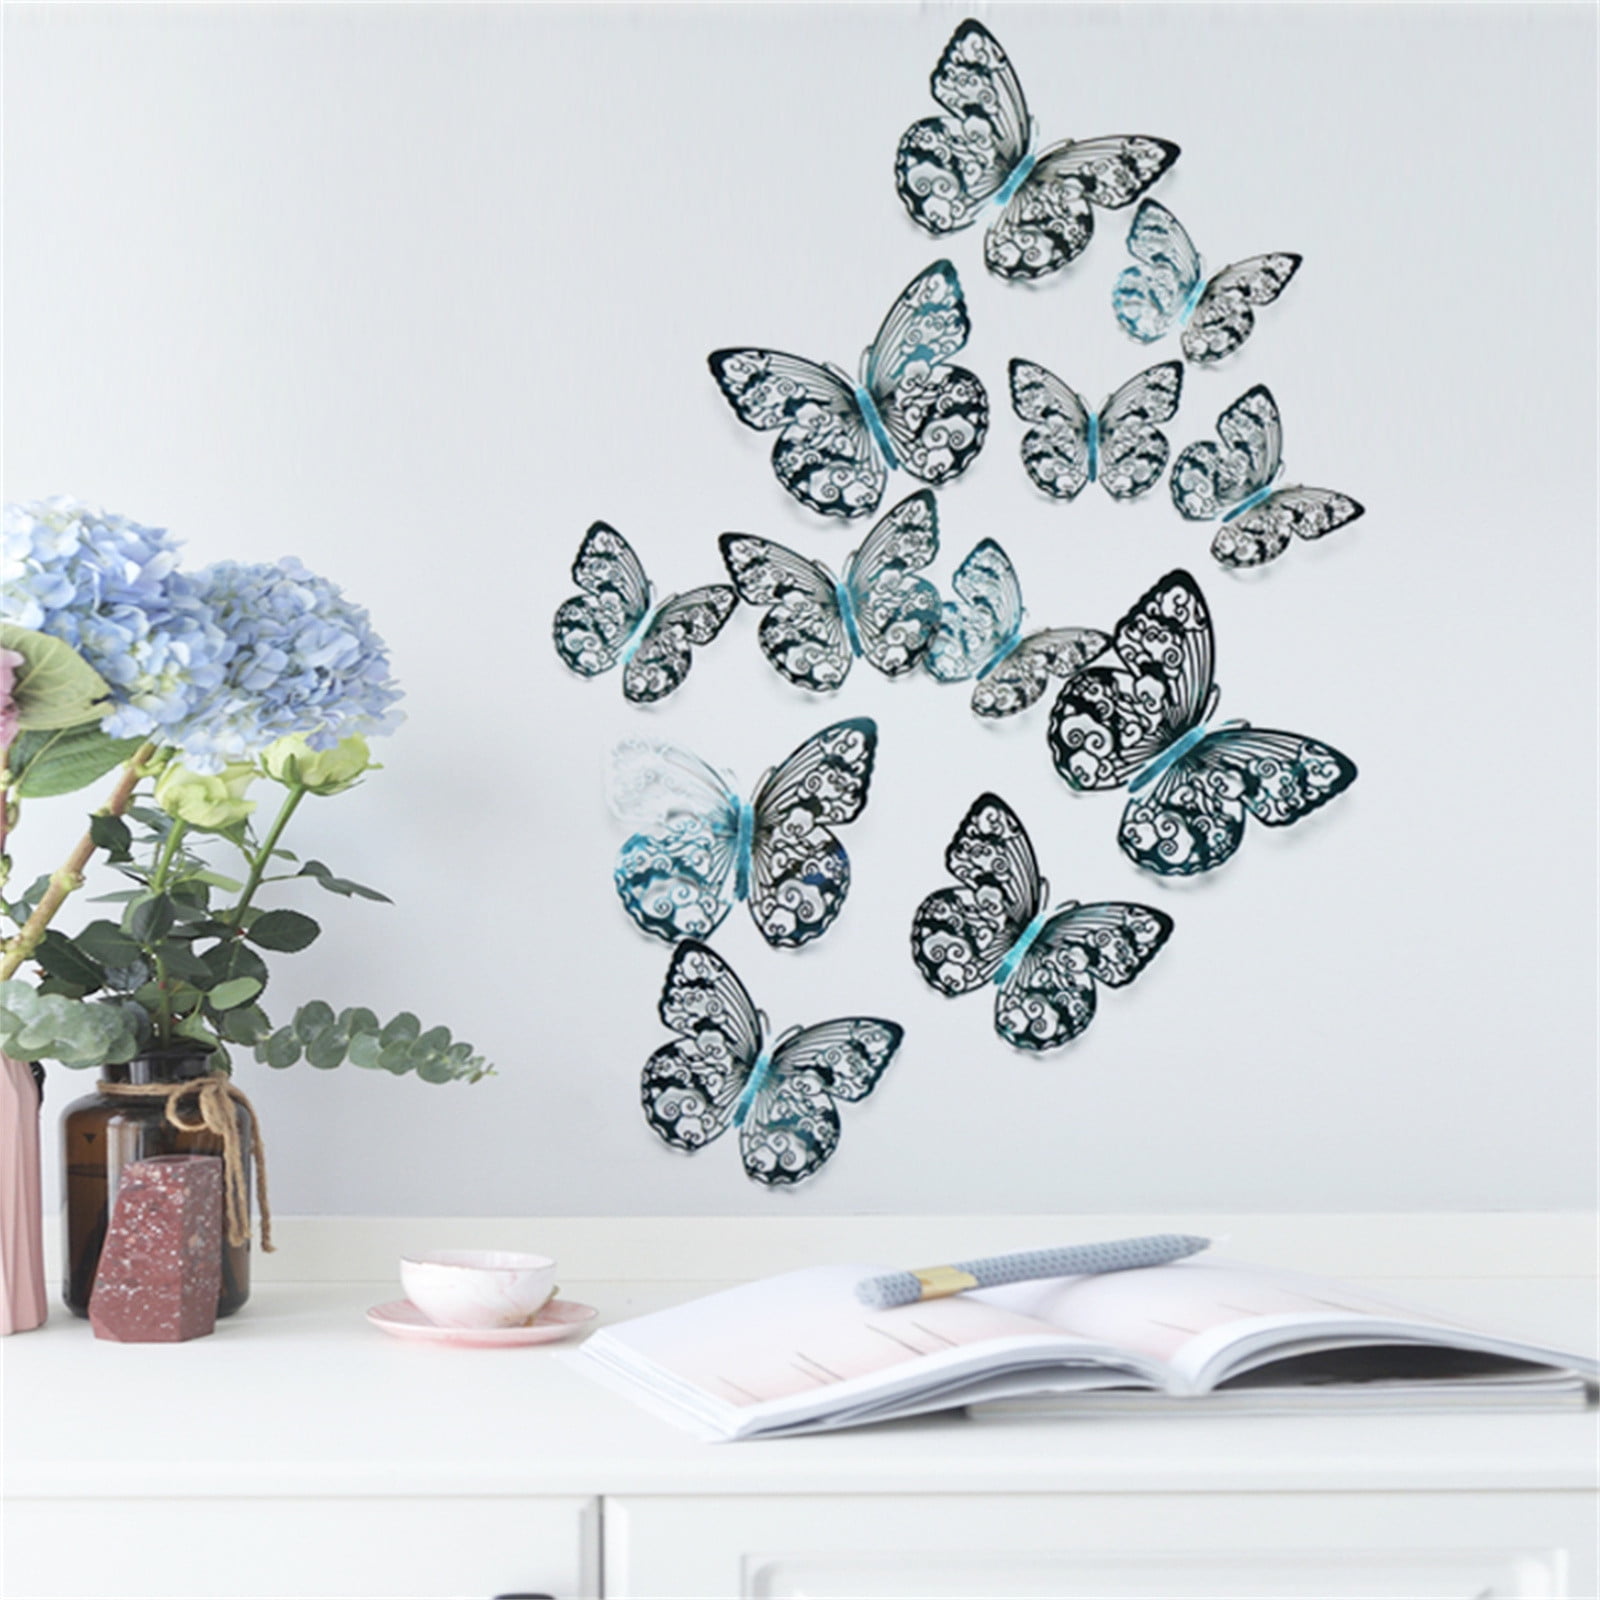  Housoutil 5pcs Butterfly Wall Sticker Mariposas Decorativas  para Fiesta Stickers Wedding Wall Decals Fridge Scrapbook Embellishments  Self-Adhesive Decal Crafts Removable 3D Pearl Paper : Baby